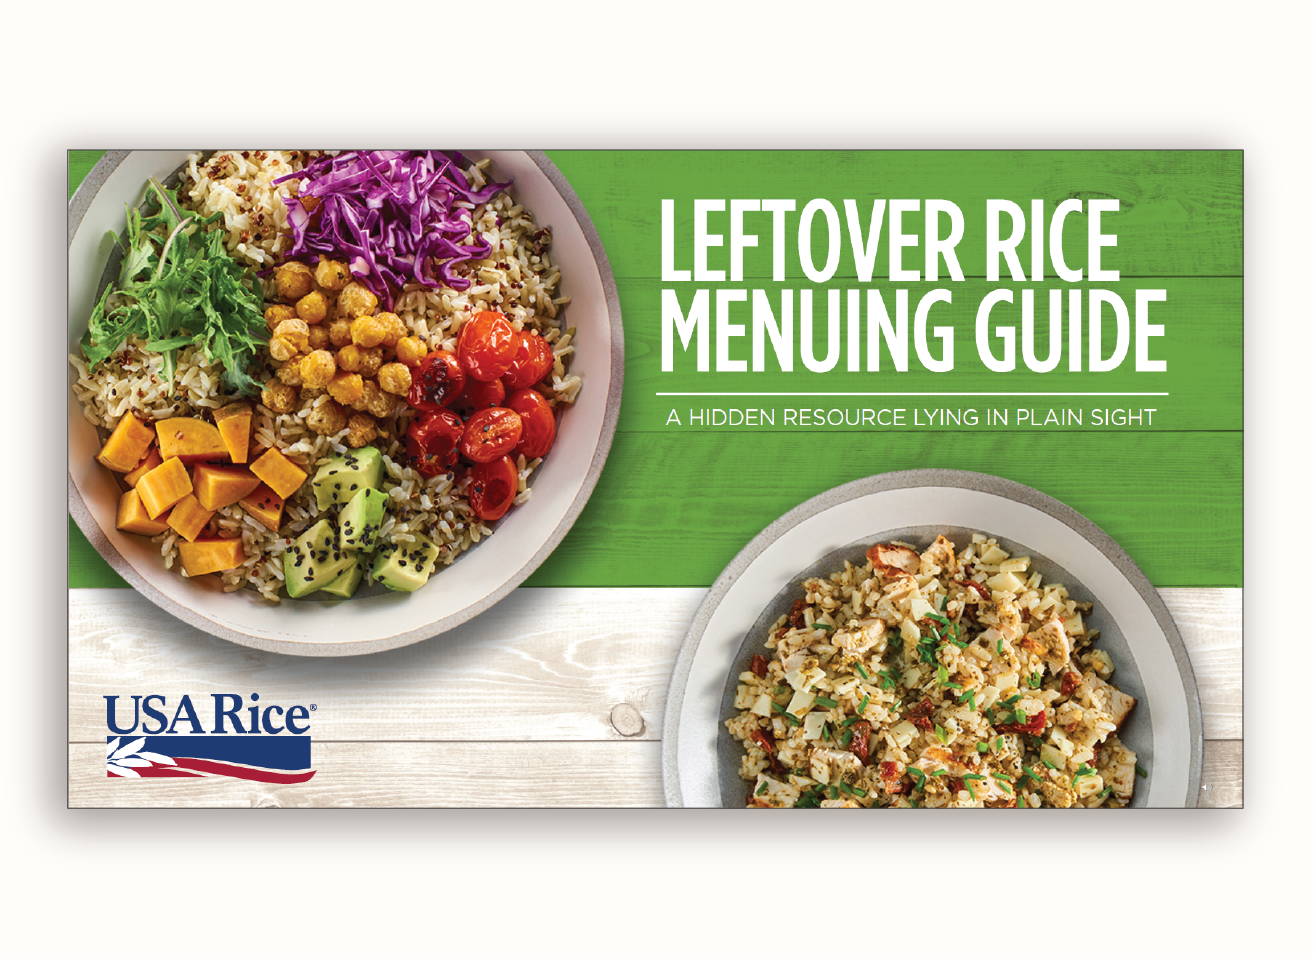 Cover of the Leftover Rice Menuing Guide